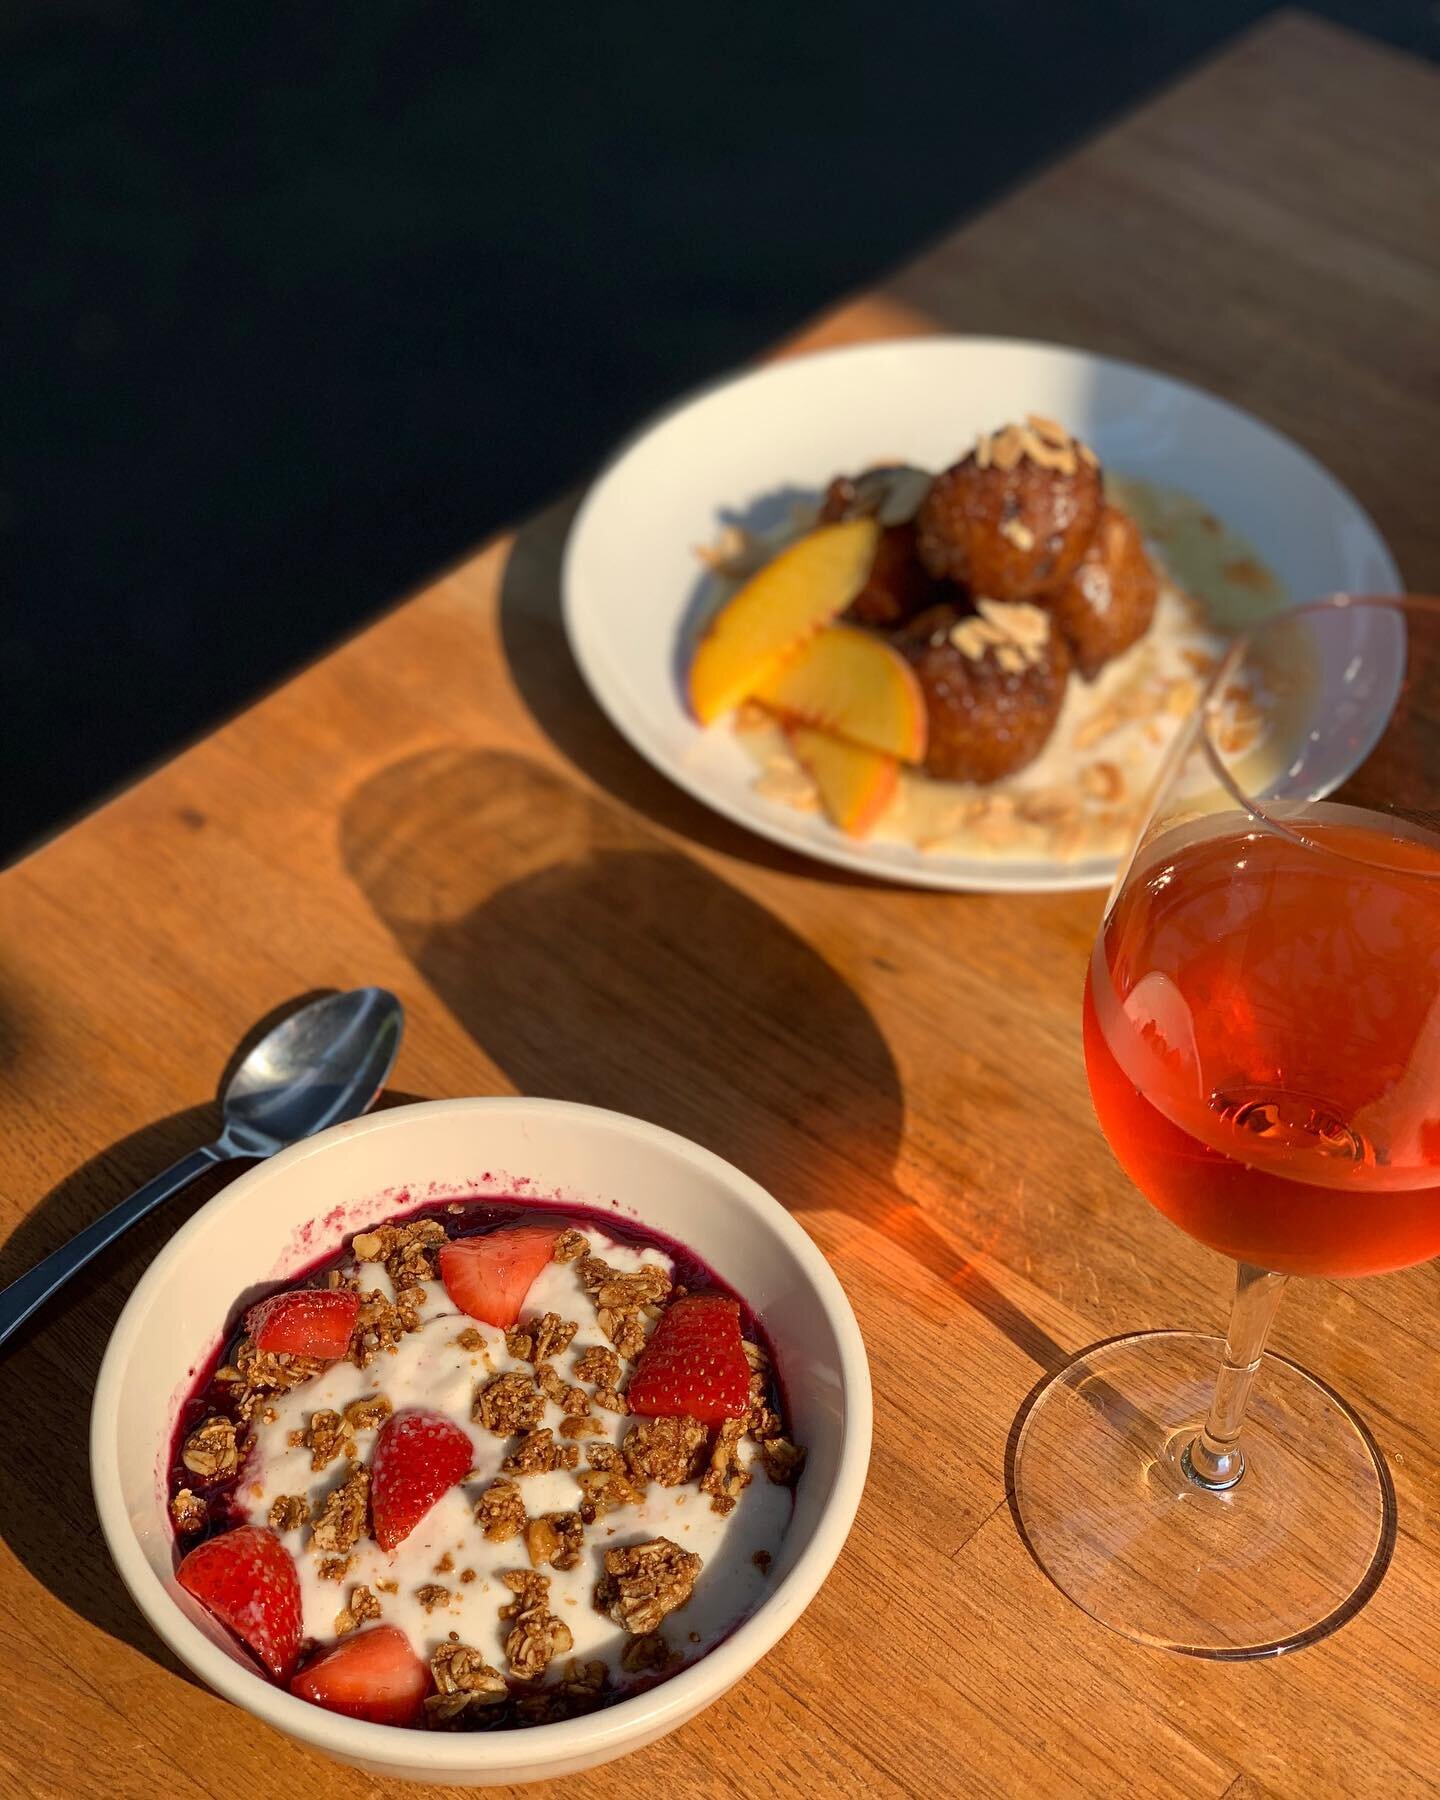 @h16apartments is brunching the right way at REV! On the patio or at home, either way, just make sure there&rsquo;s plenty of ros&eacute;✨
.
📸 @h16apartments
.
brunch menu 10-3 &bull; full menu all day
.
#OpenForBusiness #PatioDining #OpenForTakeout